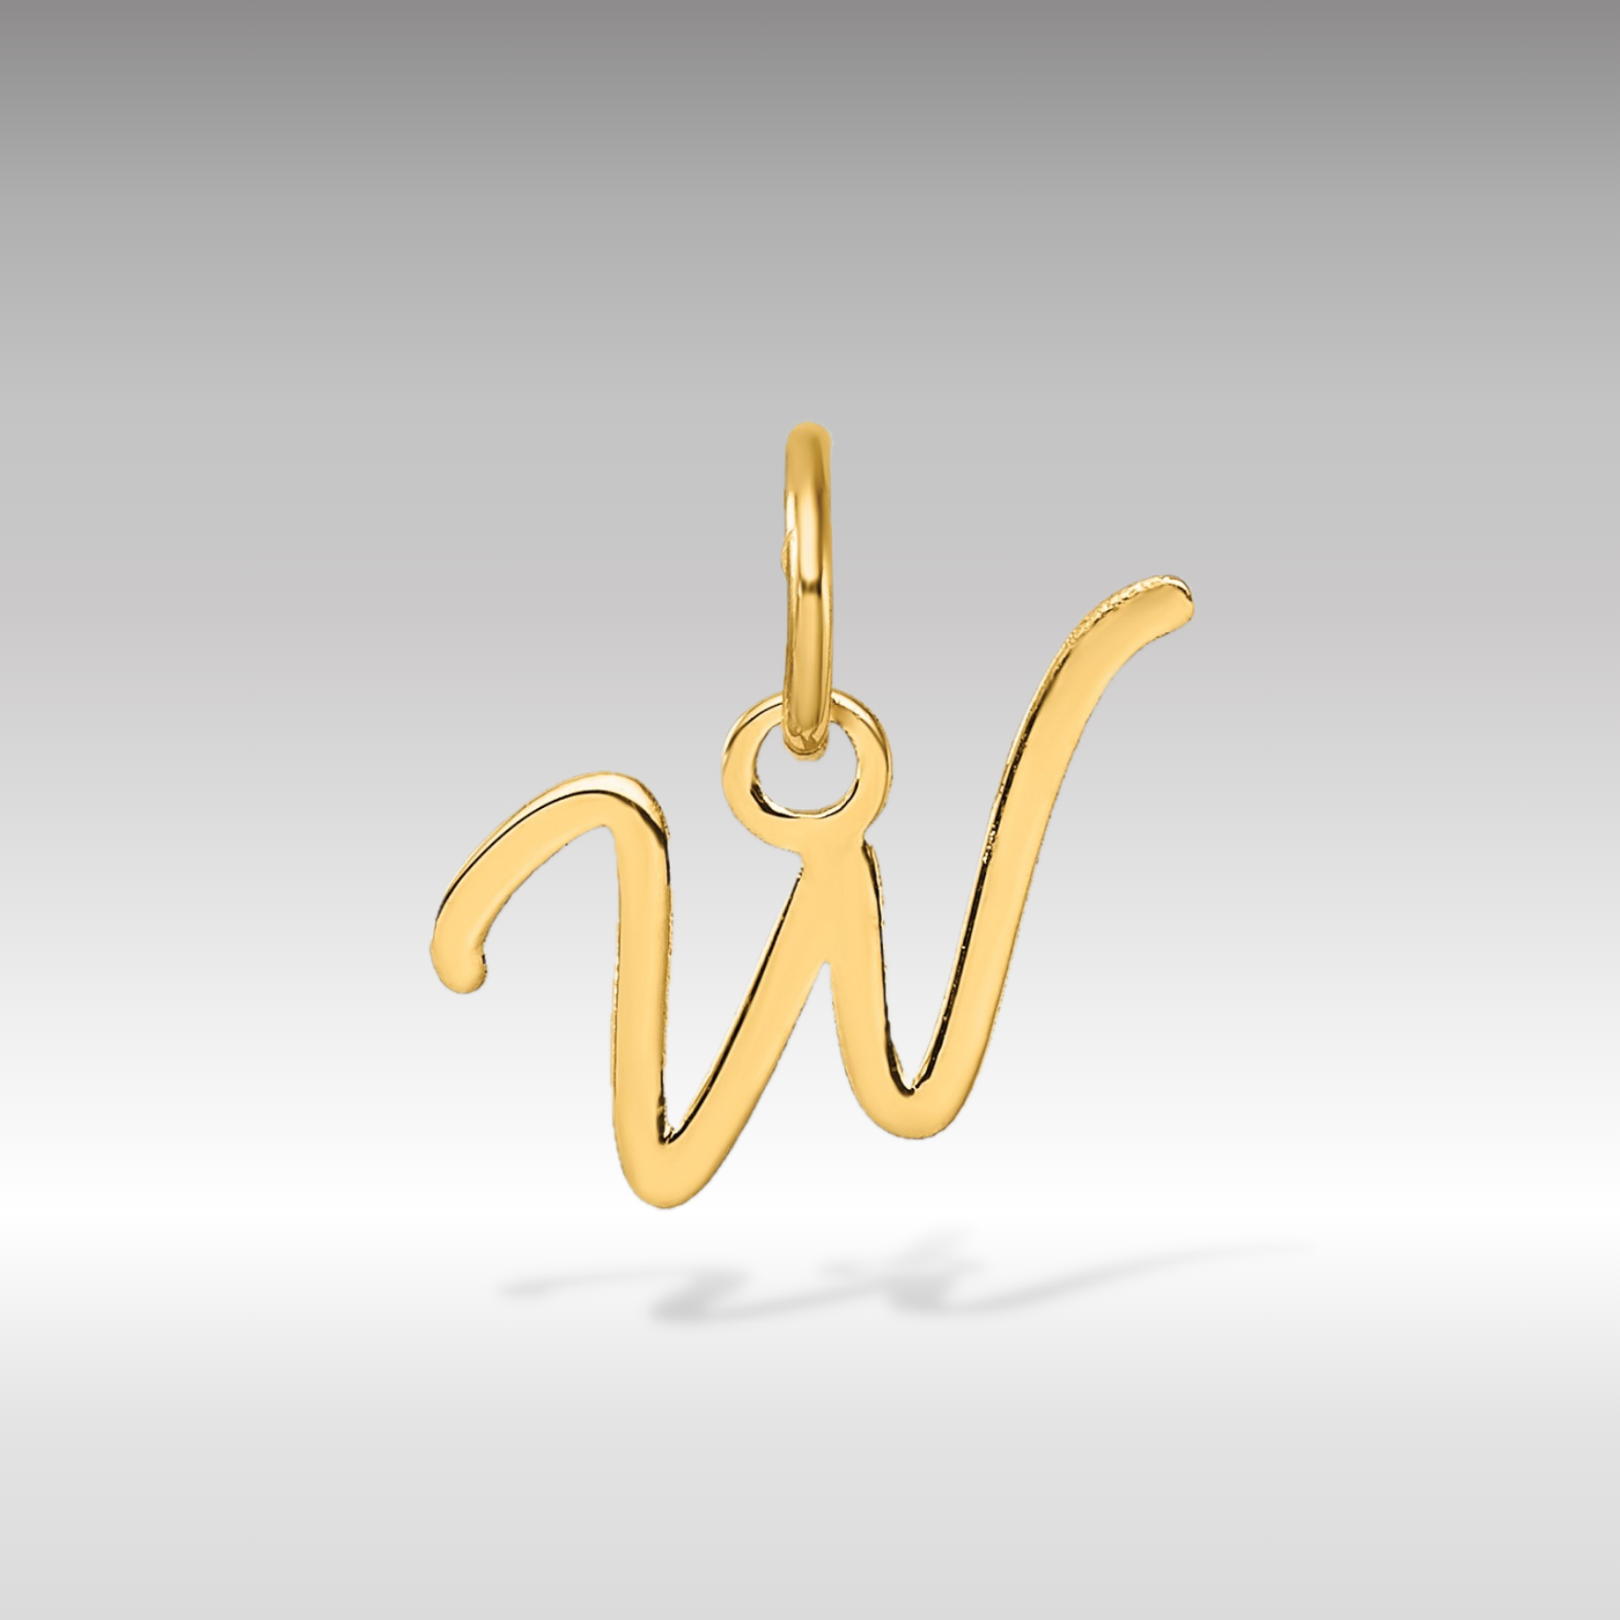 14K Gold Small Script Letter "W" Initial Pendant - Charlie & Co. Jewelry